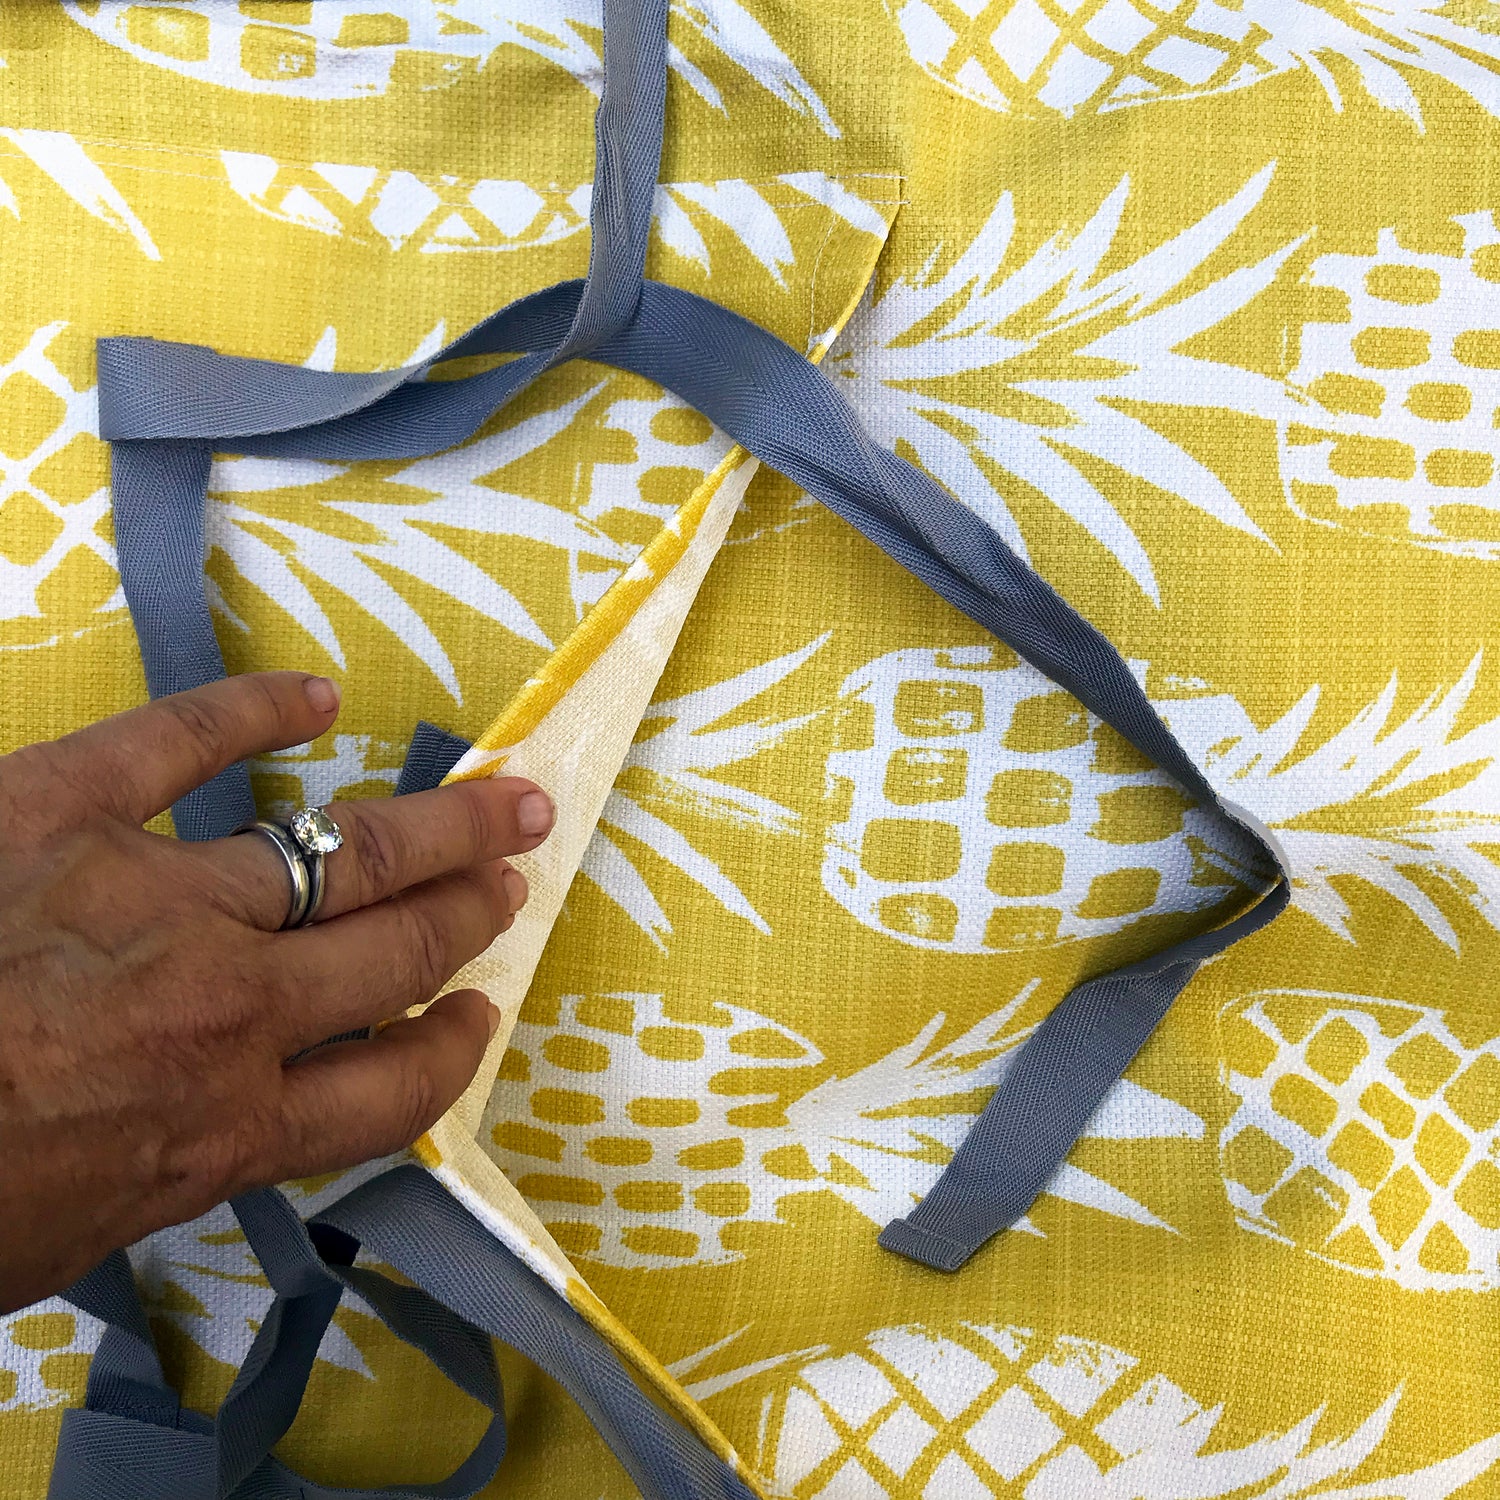 Litchfield Water Resistant Pineapple Picnic Blanket